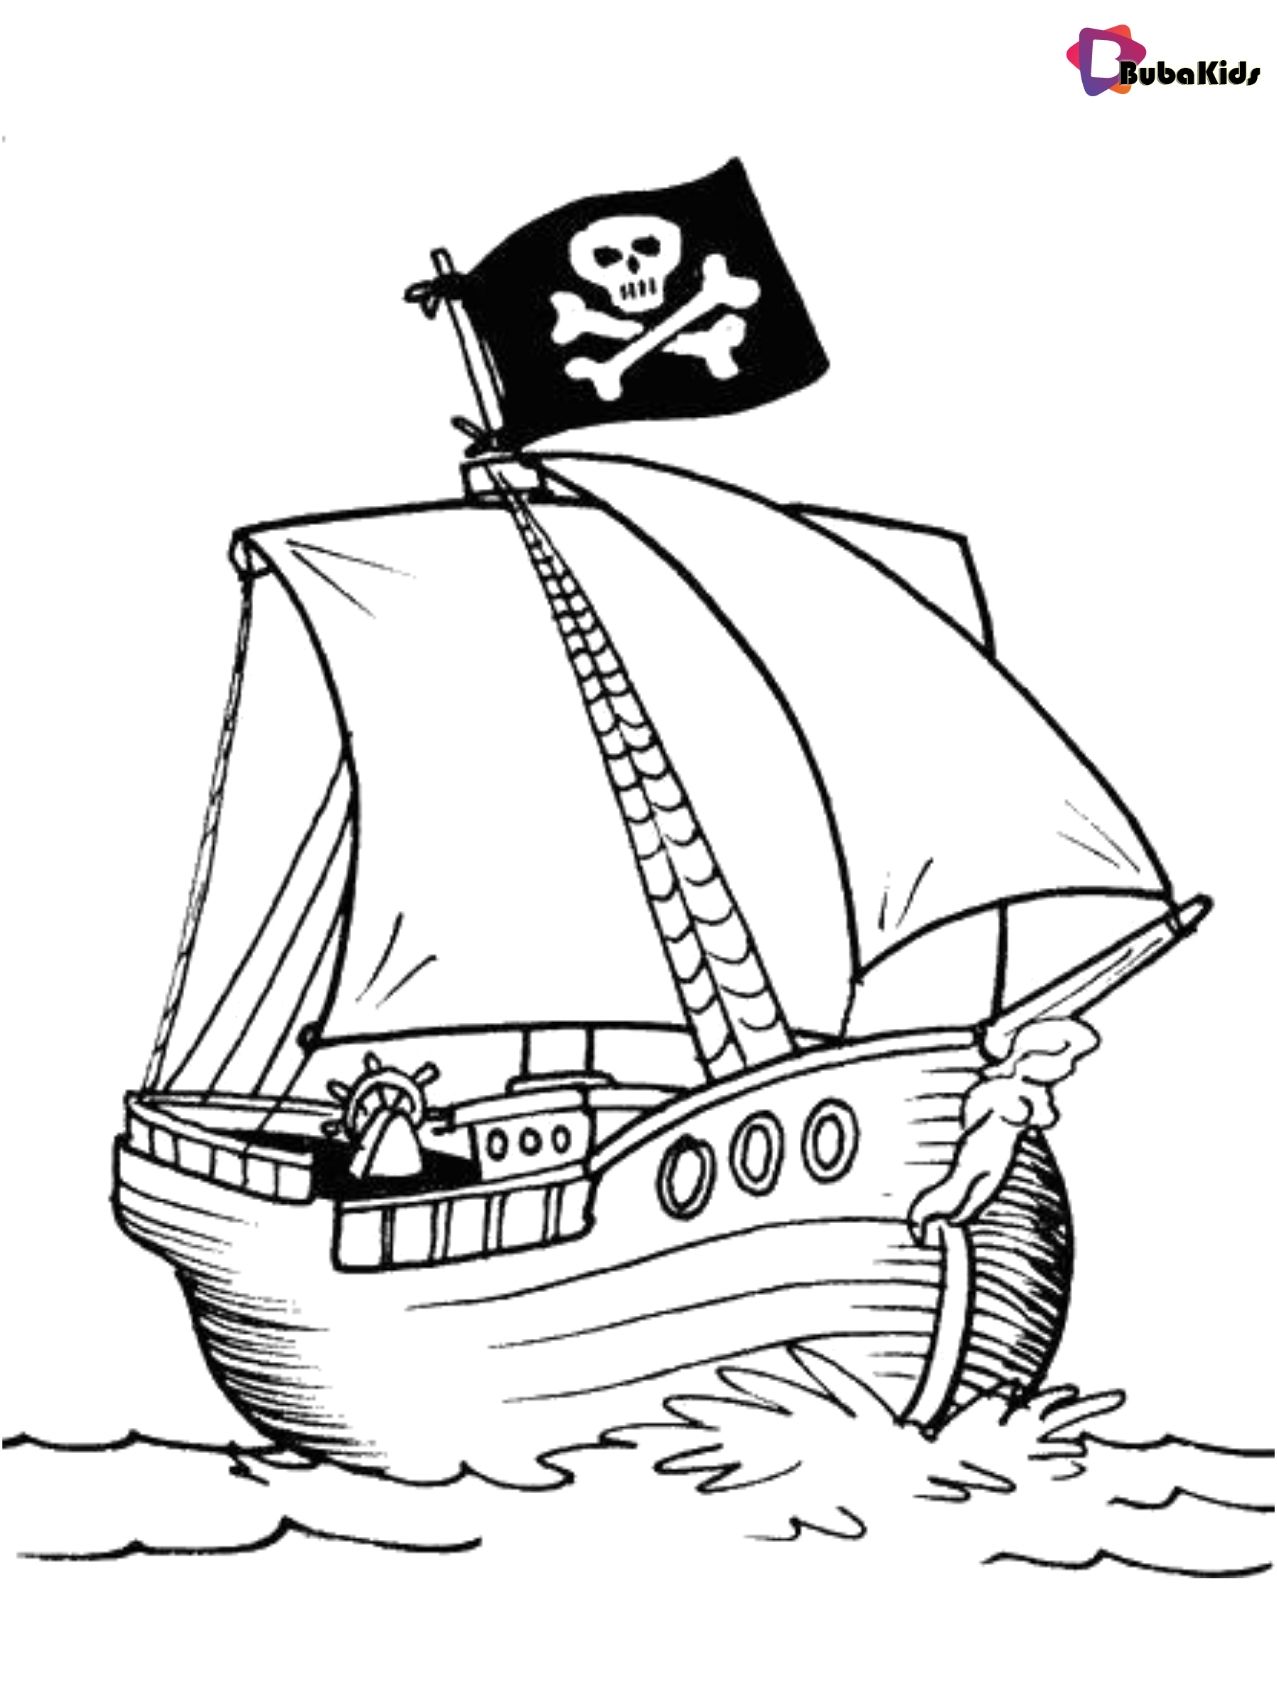 Coloring picture pirate ship free printable bubakids pirate coloring pages coloring pictures pirate art